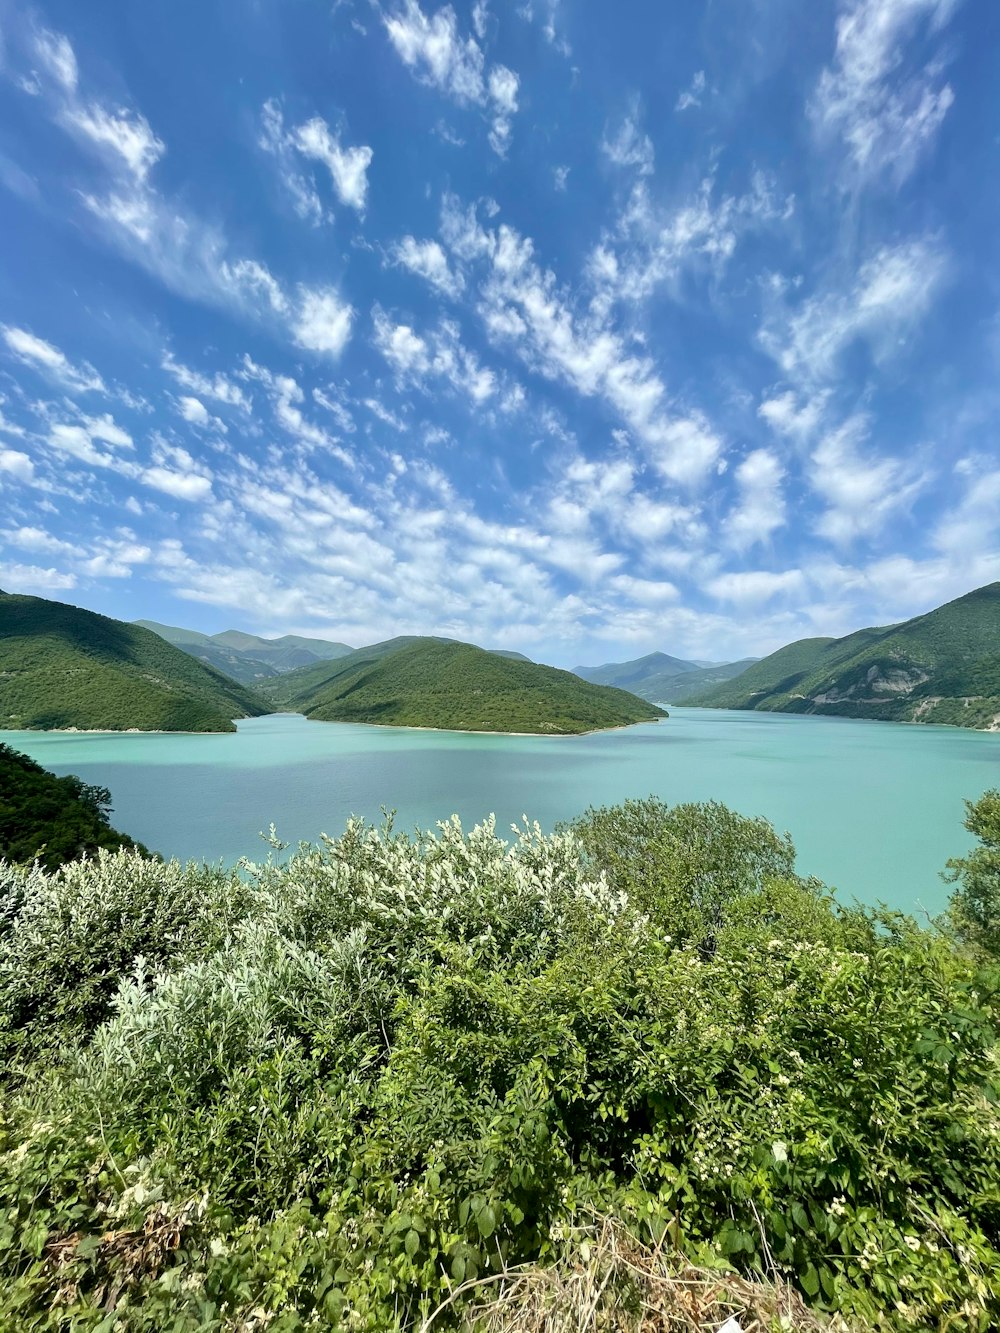 green mountains near body of water under blue sky during daytime